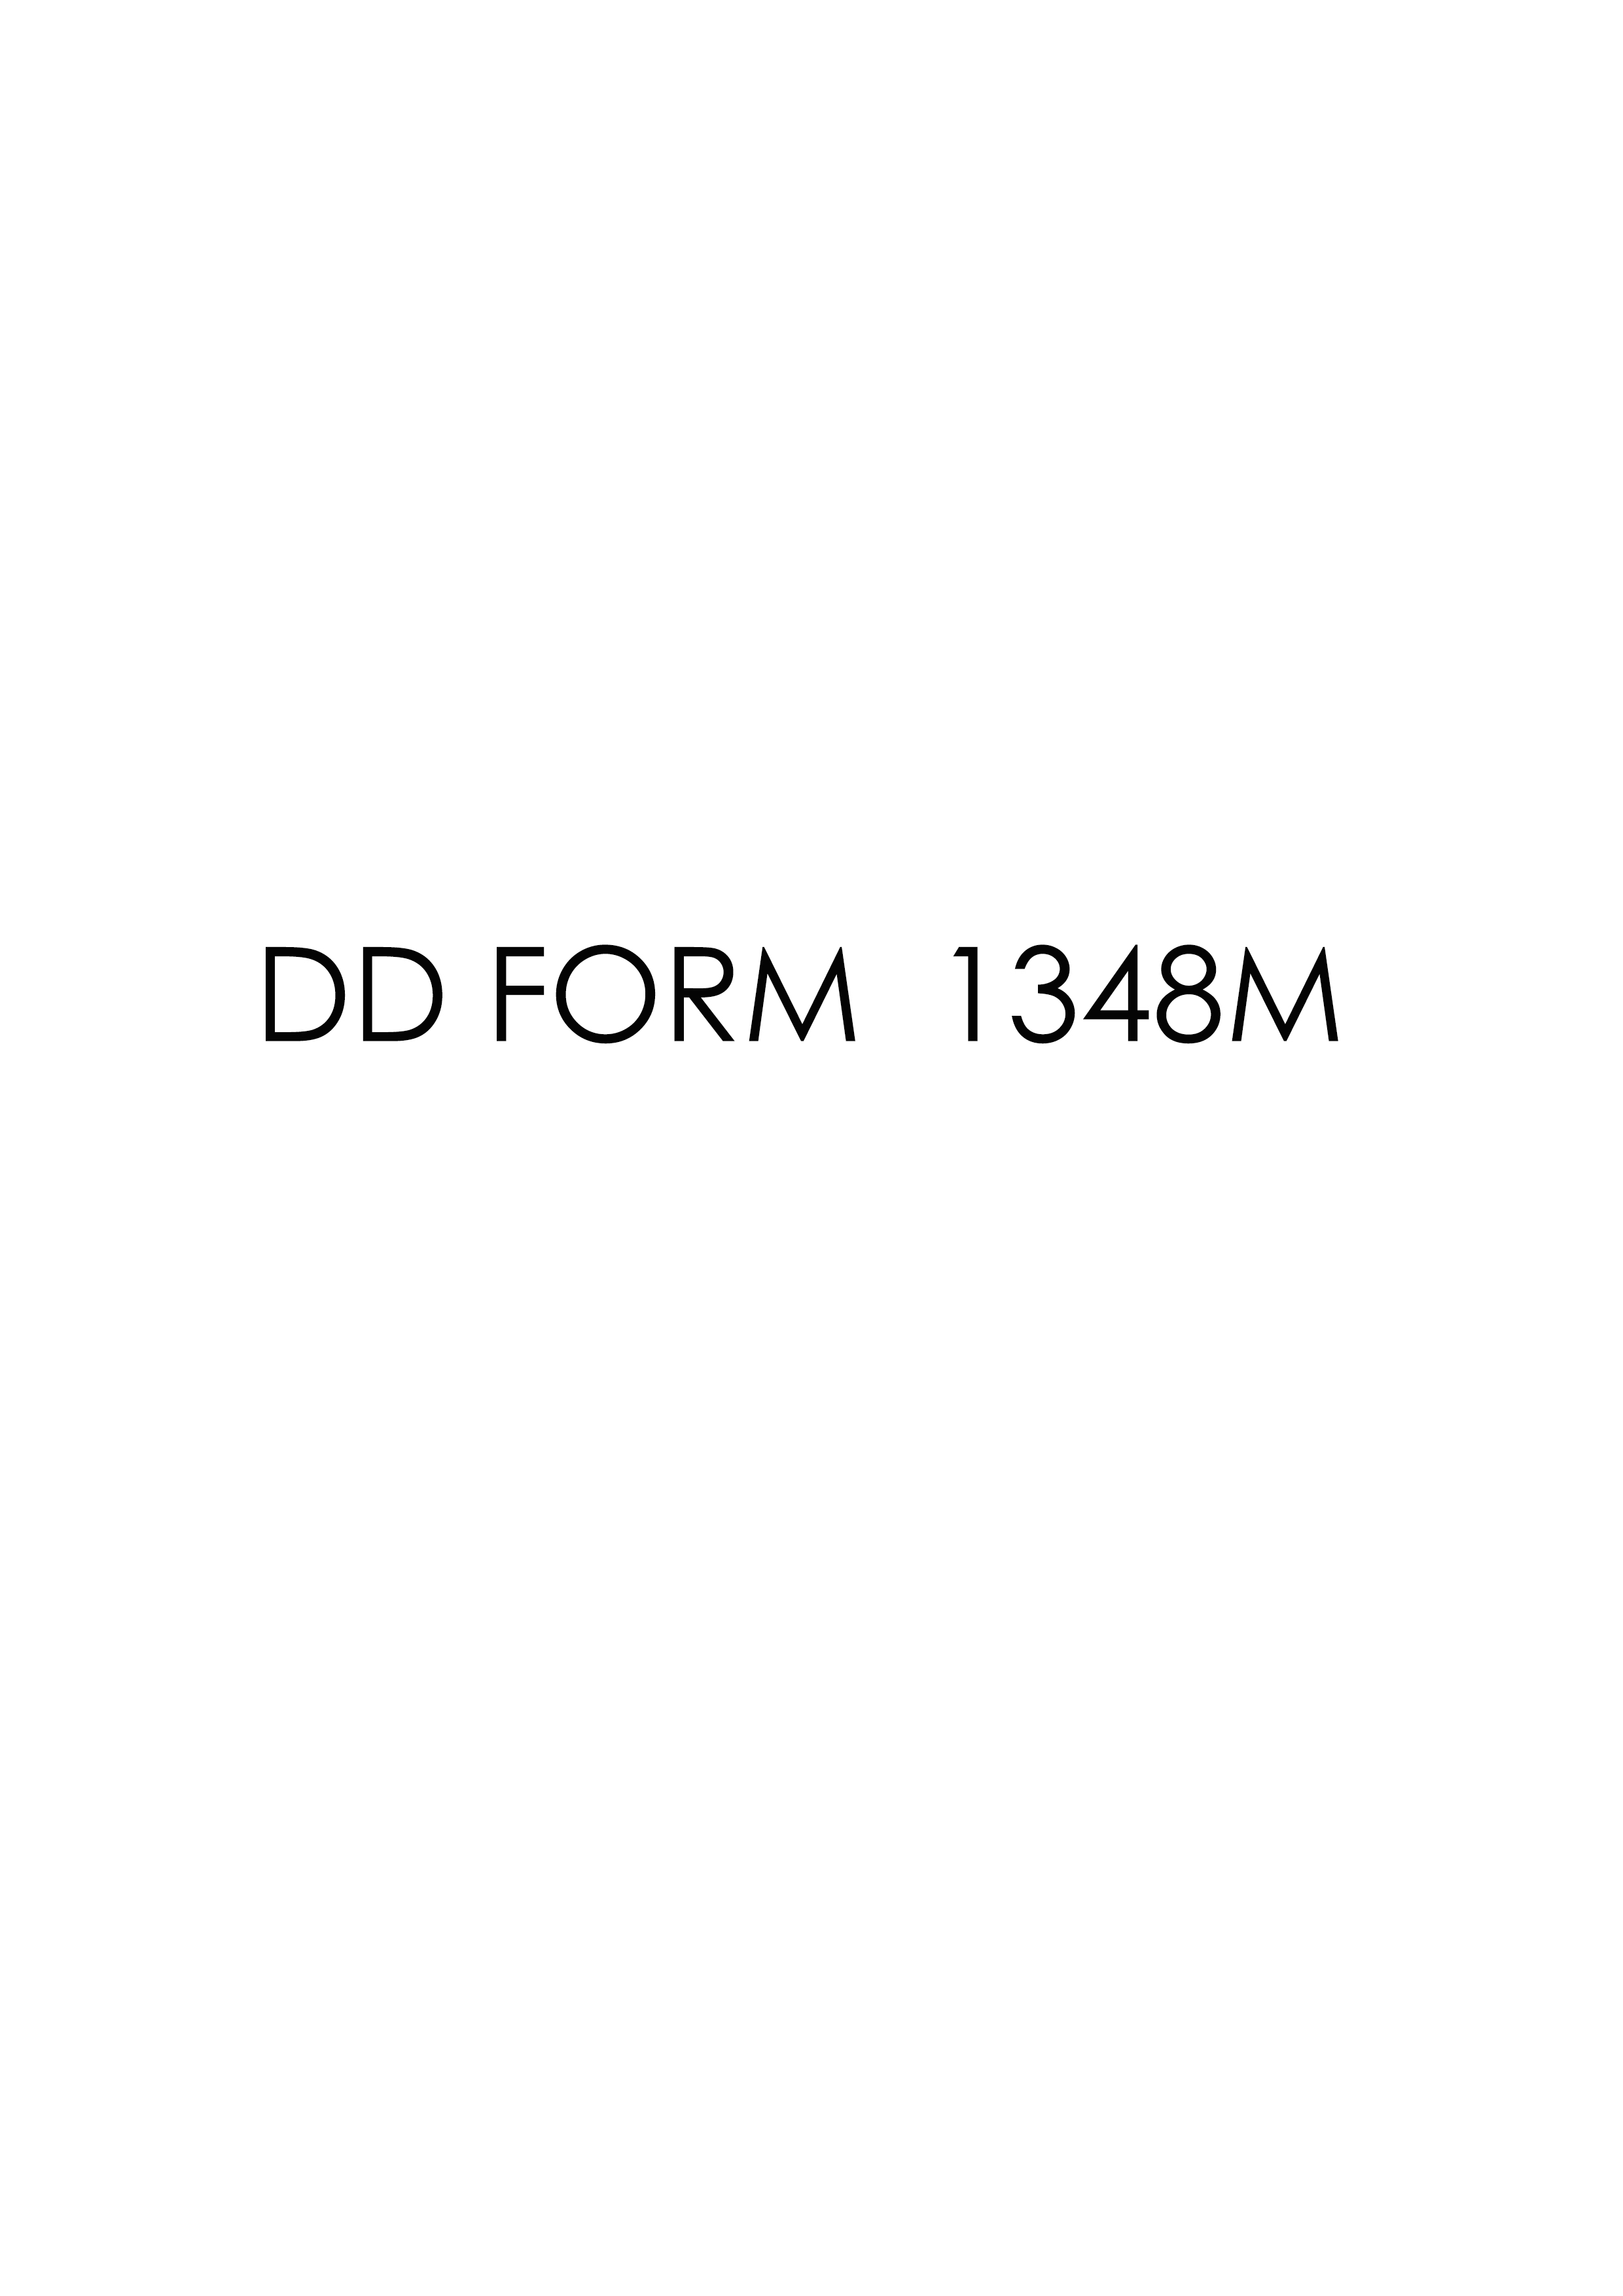 Download Fillable dd Form 1348M